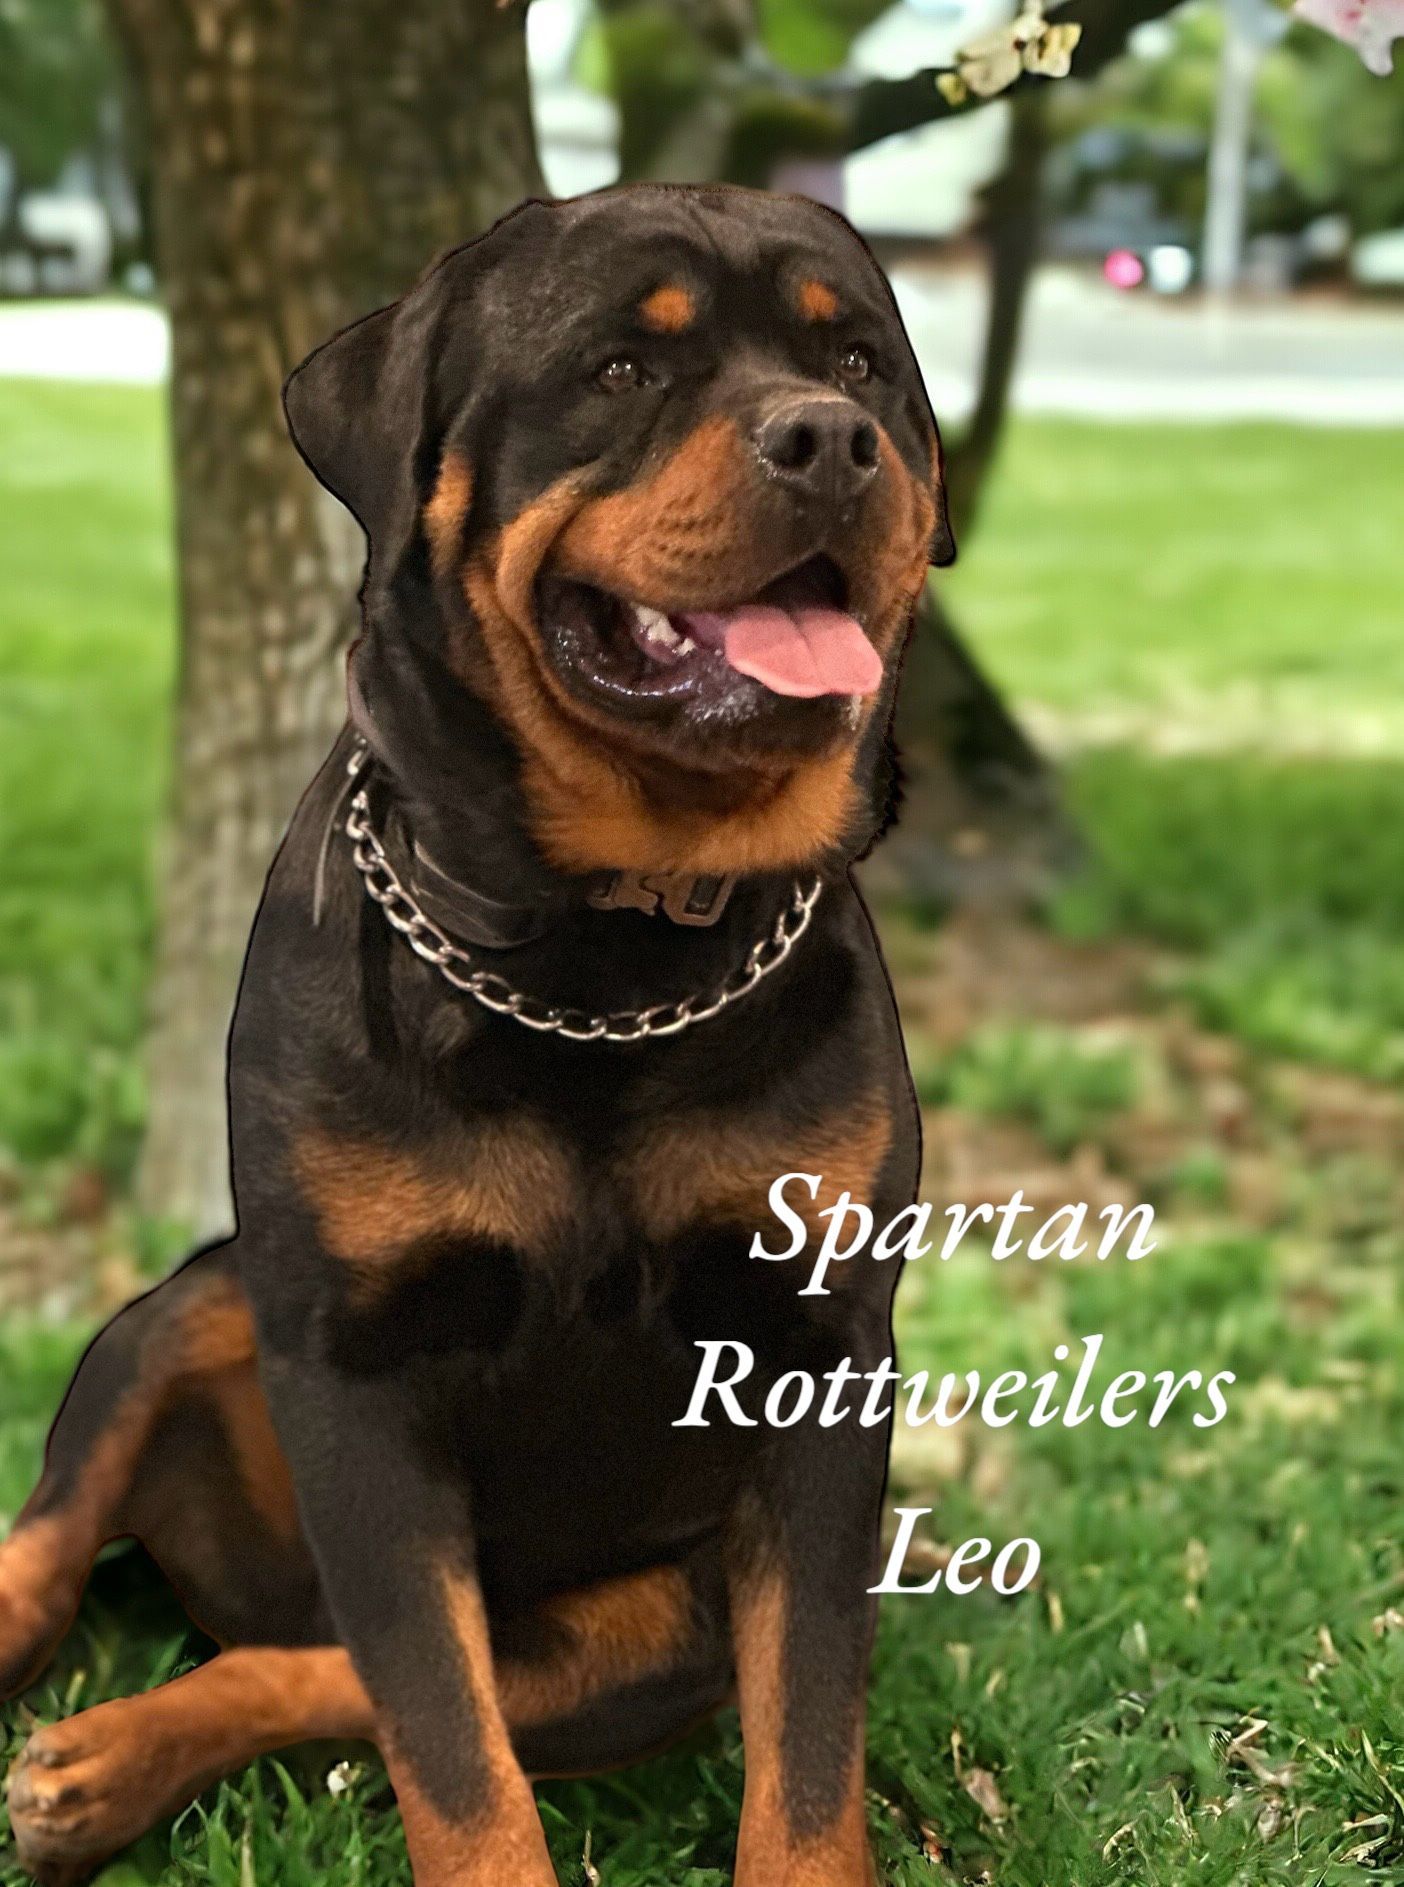 Male Rottweiler of Spartan Rottweilers with toddler girl giving him a hug